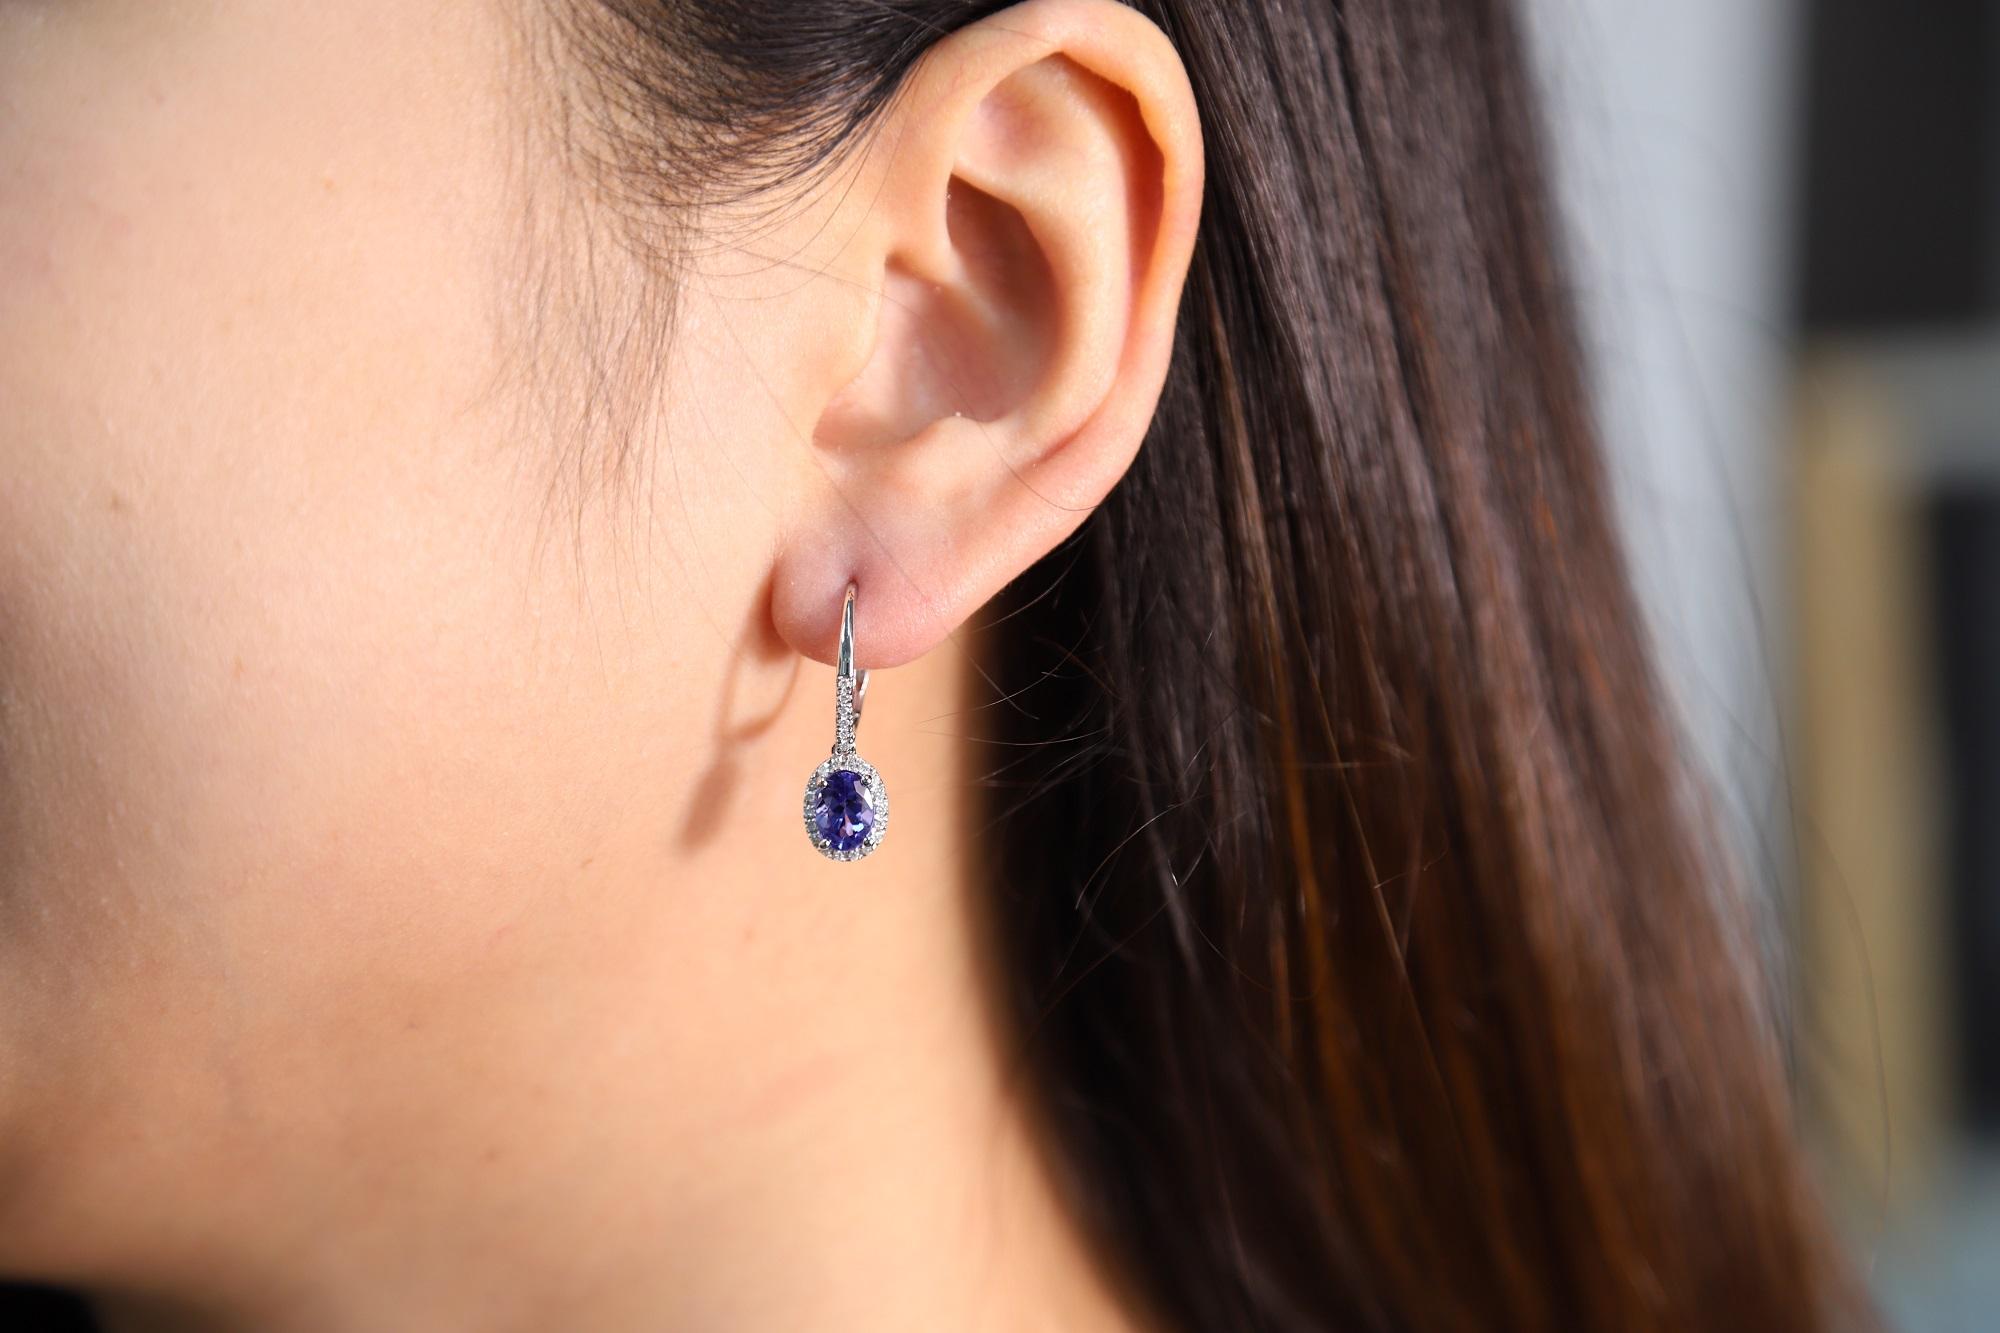 Stunning, timeless and classy eternity Unique Earring. Decorate yourself in luxury with this Gin & Grace Earring. The 14k White Gold jewelry boasts Oval-Cut Prong Setting Genuine Tanzanite (2 pcs) 1.99 Carat, along with Natural Round cut white